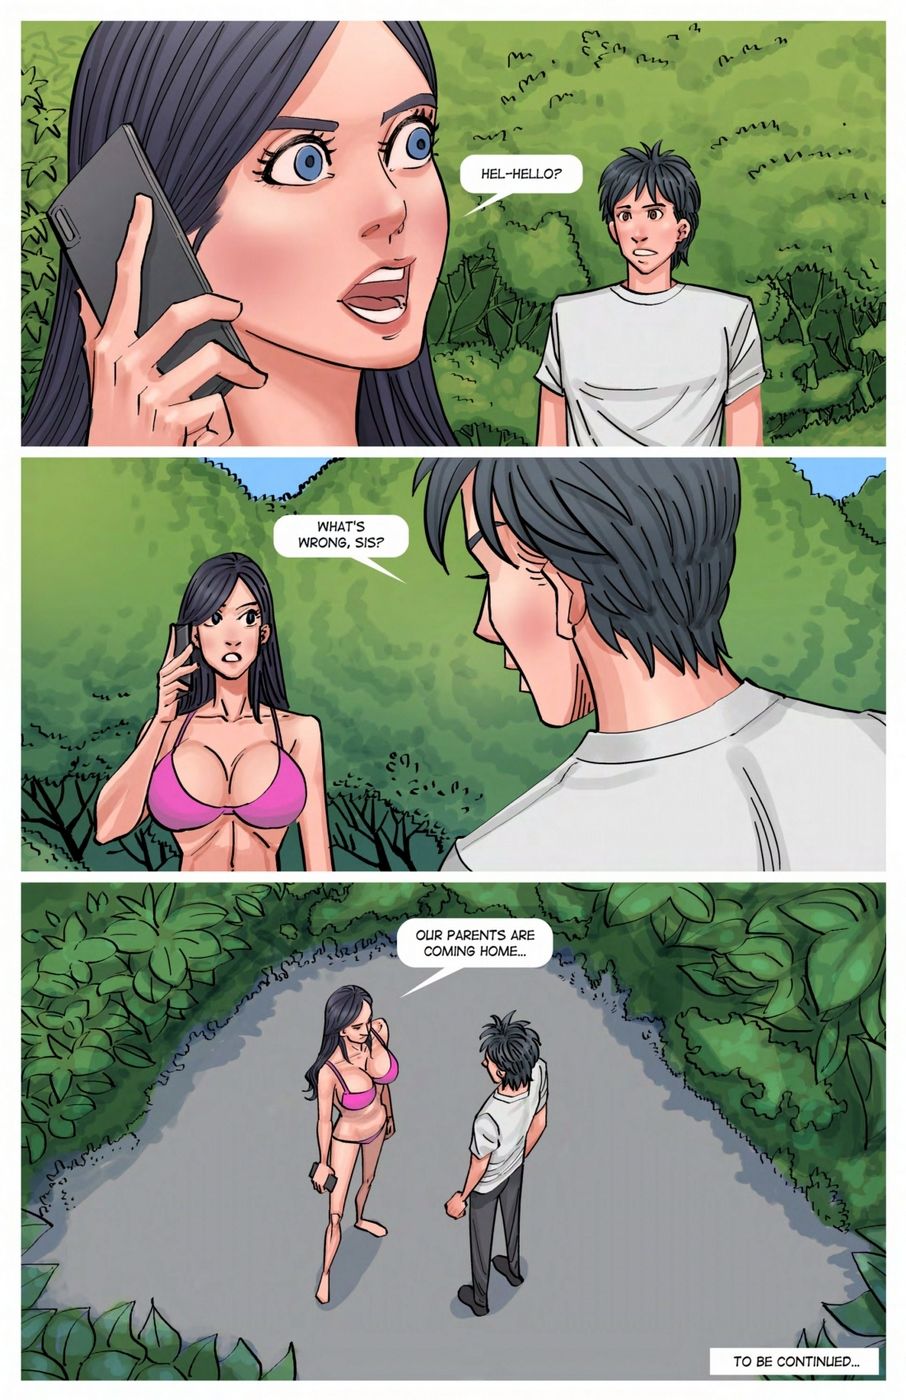 Pool Party Growth 3 - GiantessFan page 17